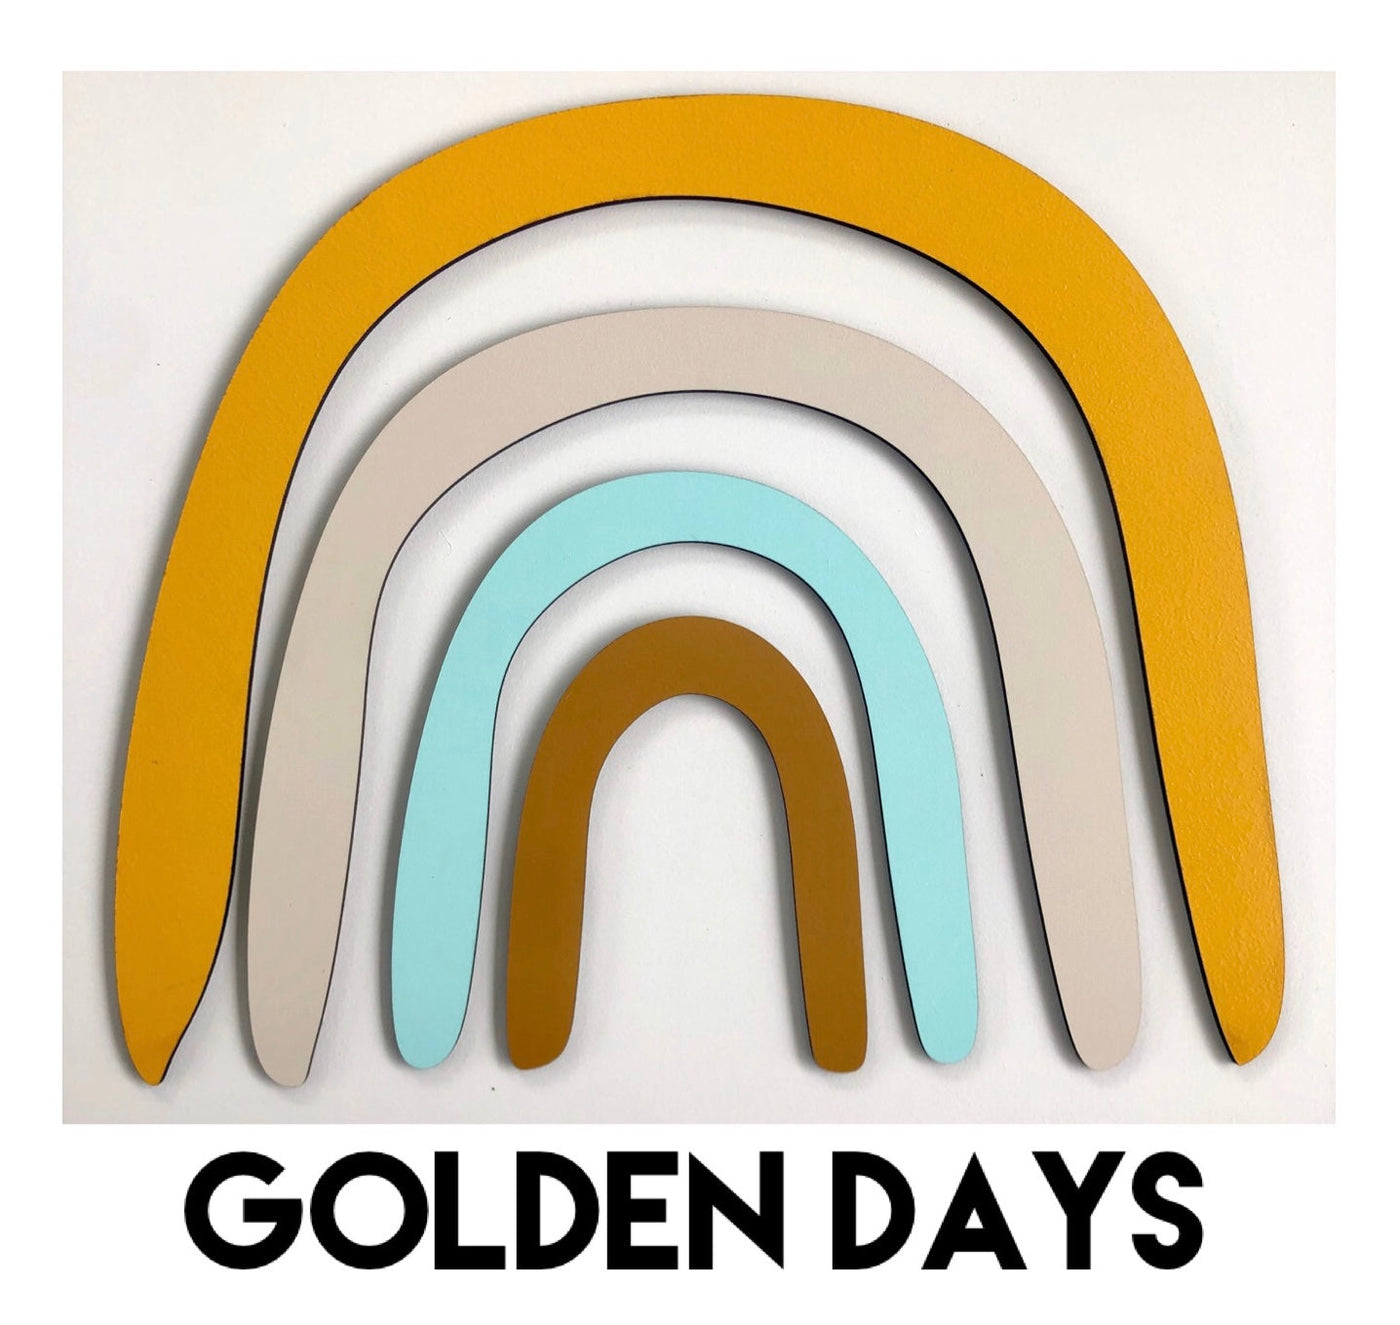 Rainbow Wall Decal - Golden Days Room Decor Timber Tinkers 